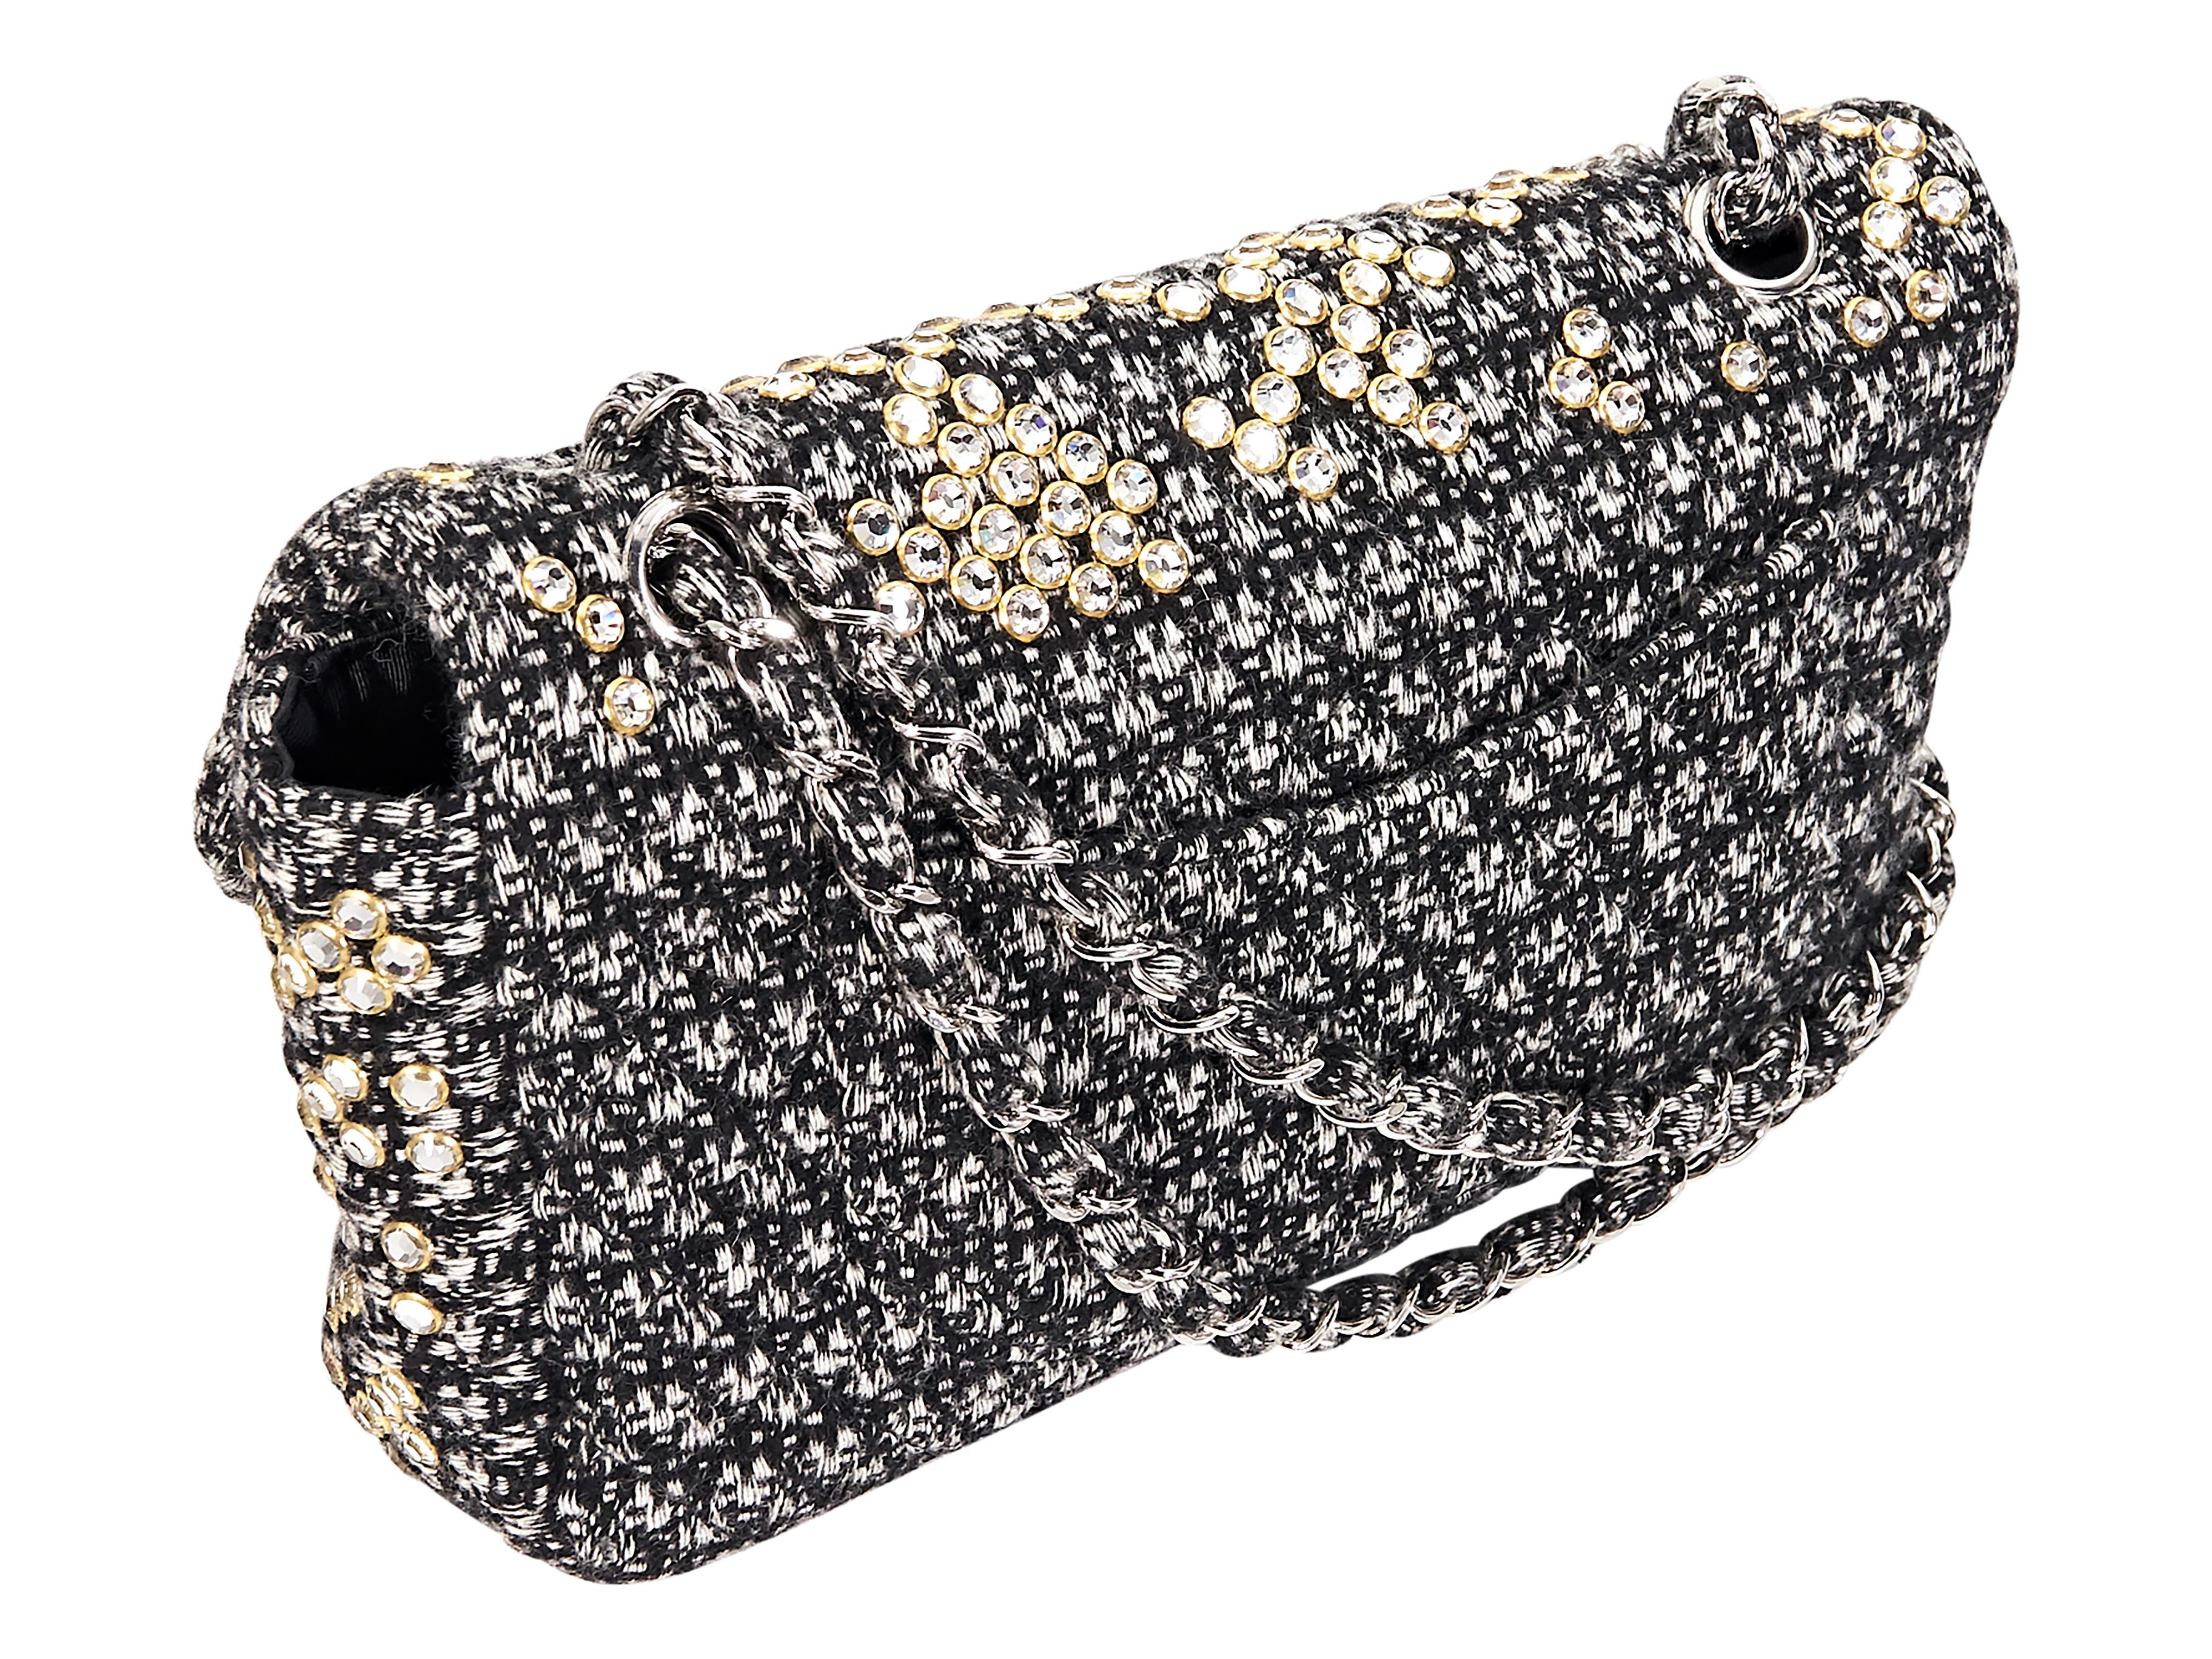 Product details:  Black and white tweed classic flap shoulder bag by Chanel.  Accented with Swarovski crystals.  Dual chain shoulder straps.  Front flap with twist-lock closure.  Lined interior with inner zip and slide pockets.  Back exterior slide